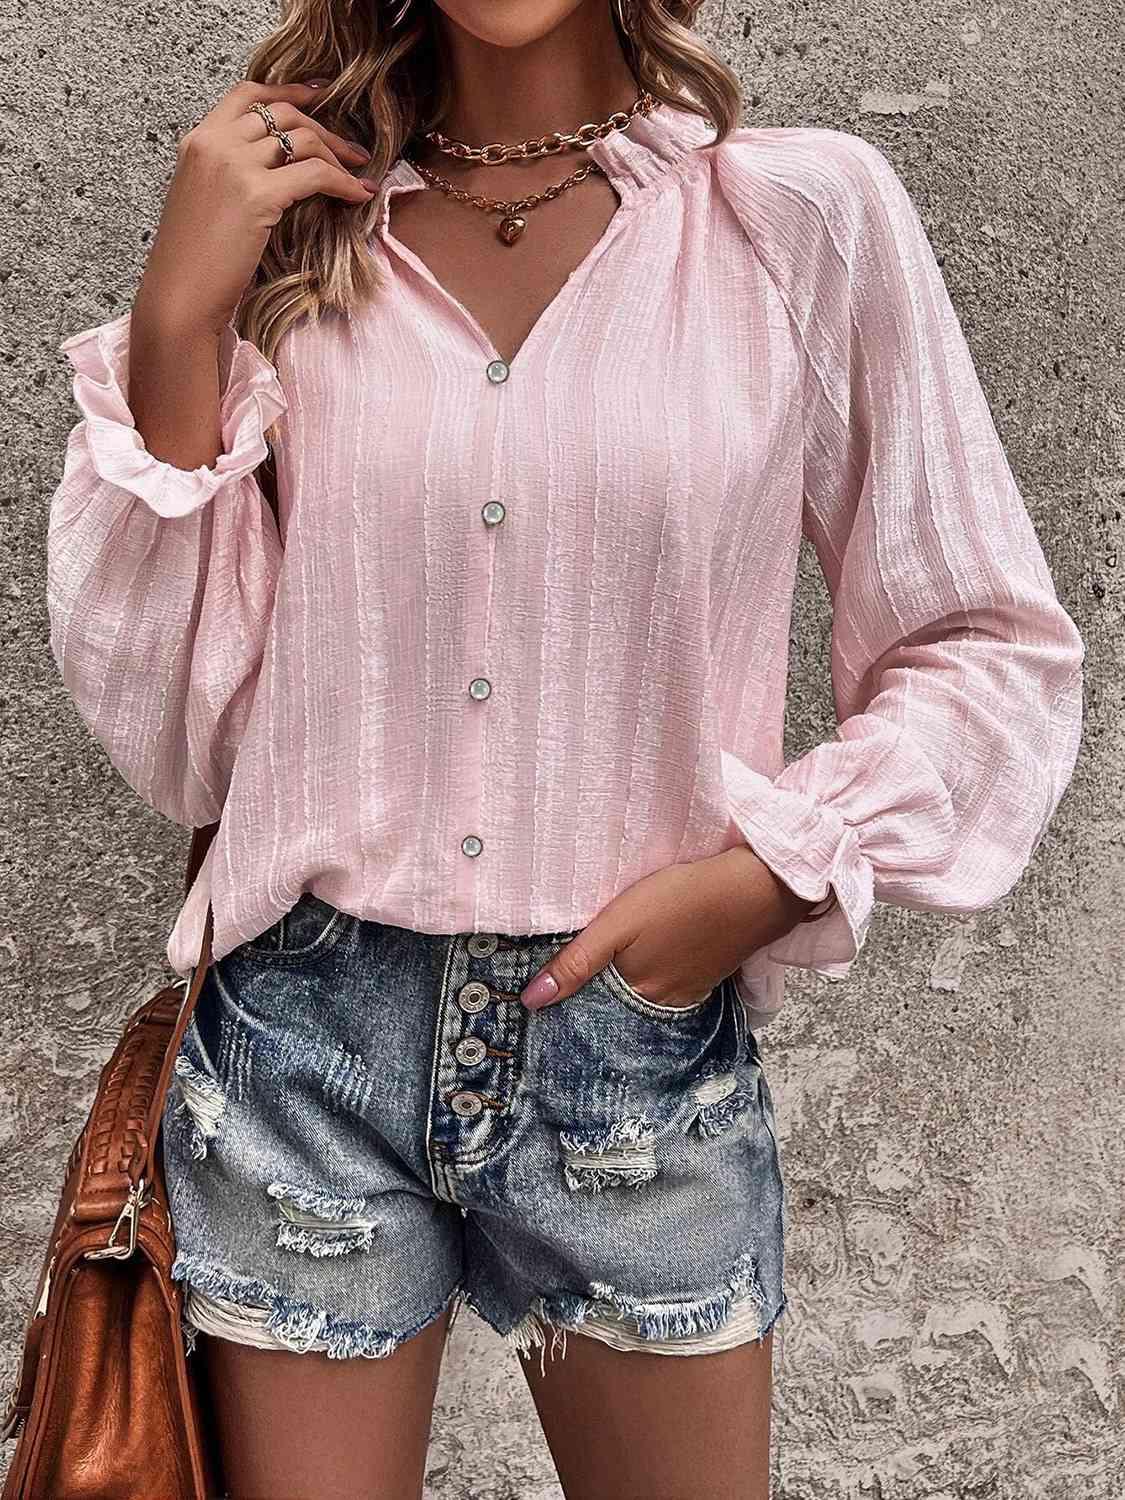 a woman wearing a pink blouse and denim shorts